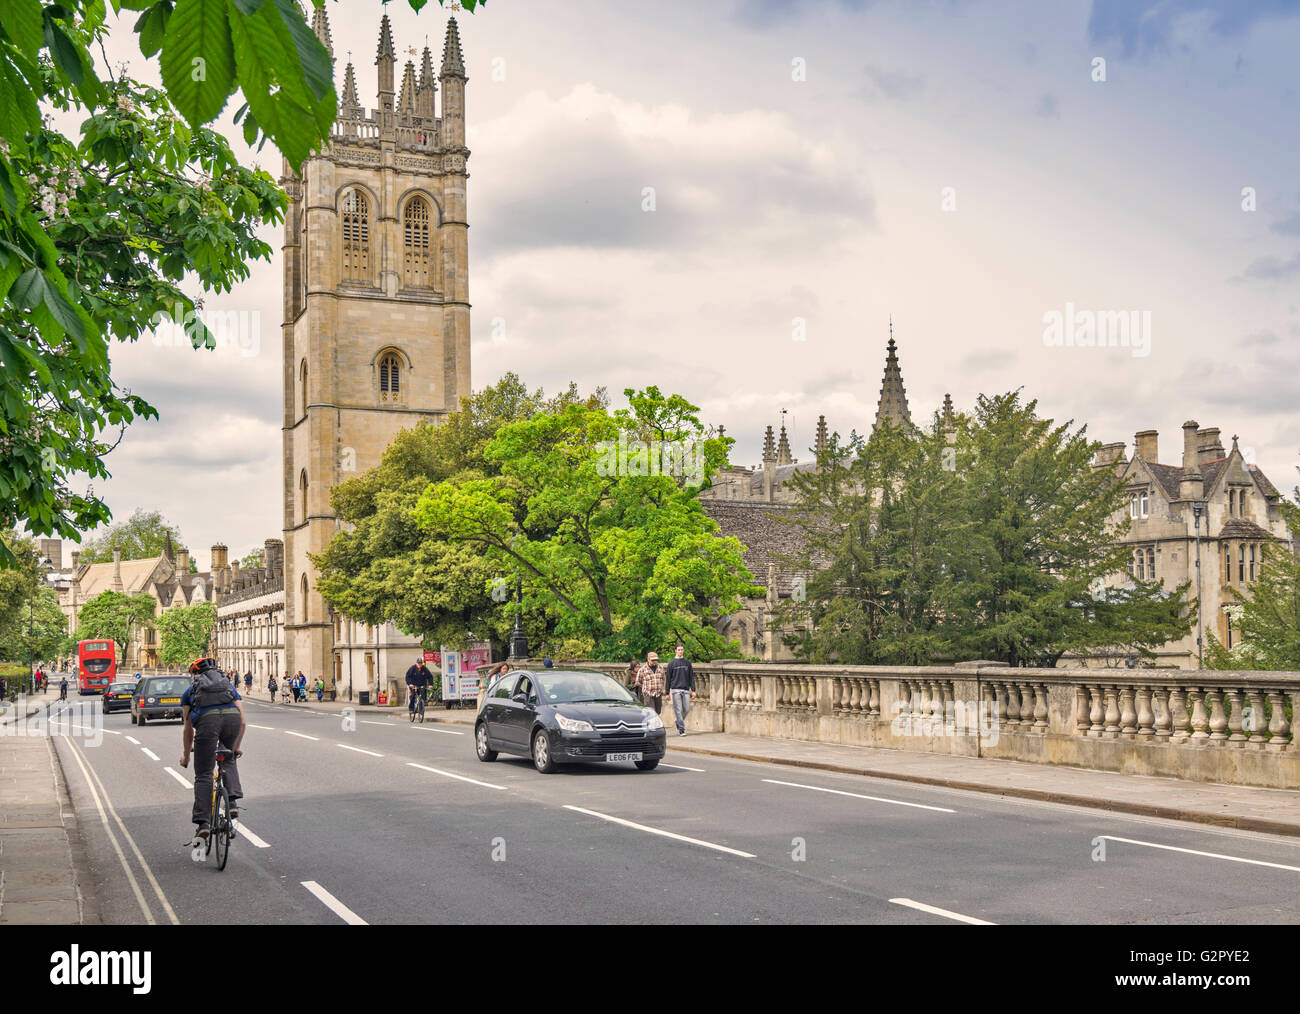 OXFORD CITY MAGDALEN BRIDGE LOOKING TOWARDS THE TOWER OF MAGDALEN COLLEGE CHURCH Stock Photo